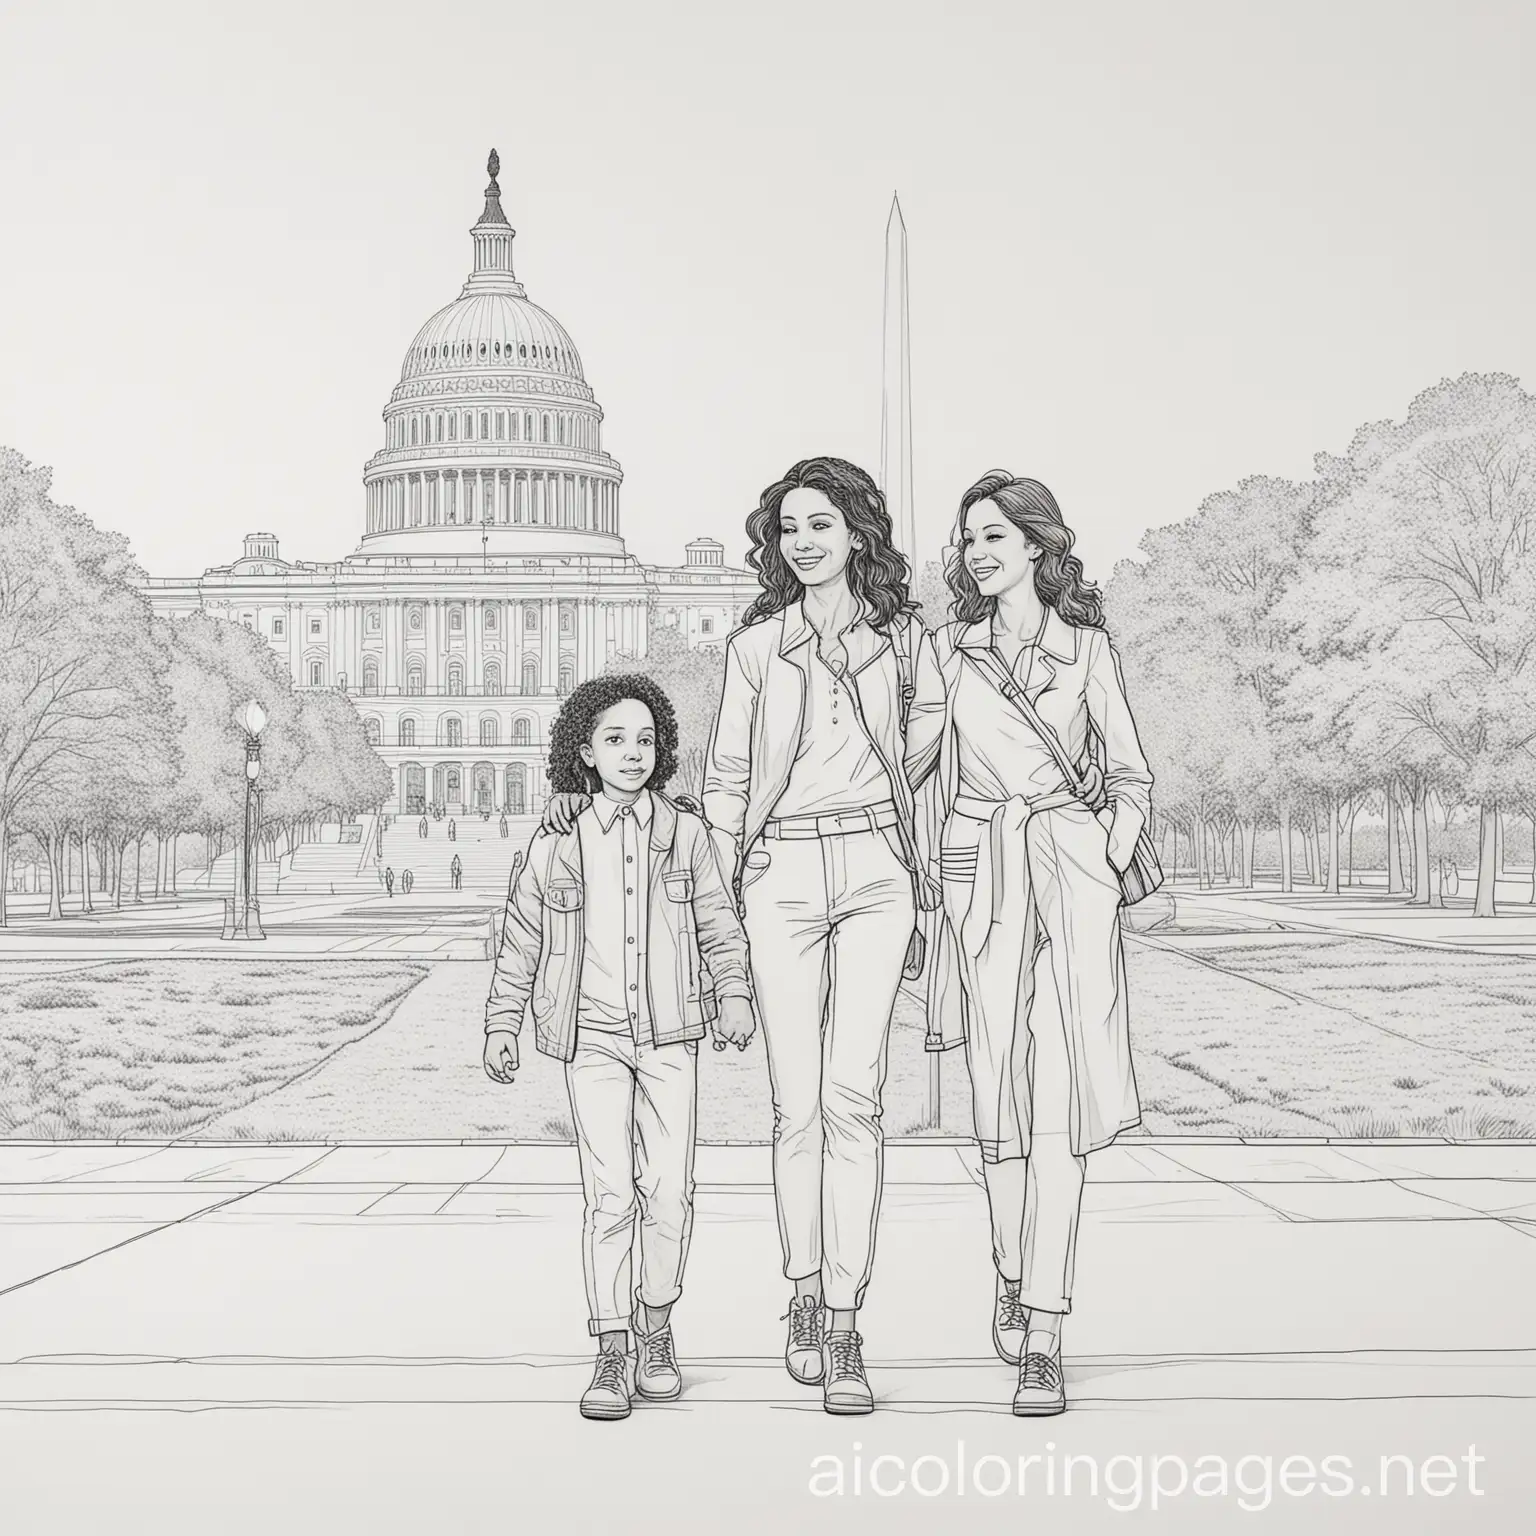 A family in Washington D.C, Coloring Page, black and white, line art, white background, Simplicity, Ample White Space. The background of the coloring page is plain white to make it easy for young children to color within the lines. The outlines of all the subjects are easy to distinguish, making it simple for kids to color without too much difficulty